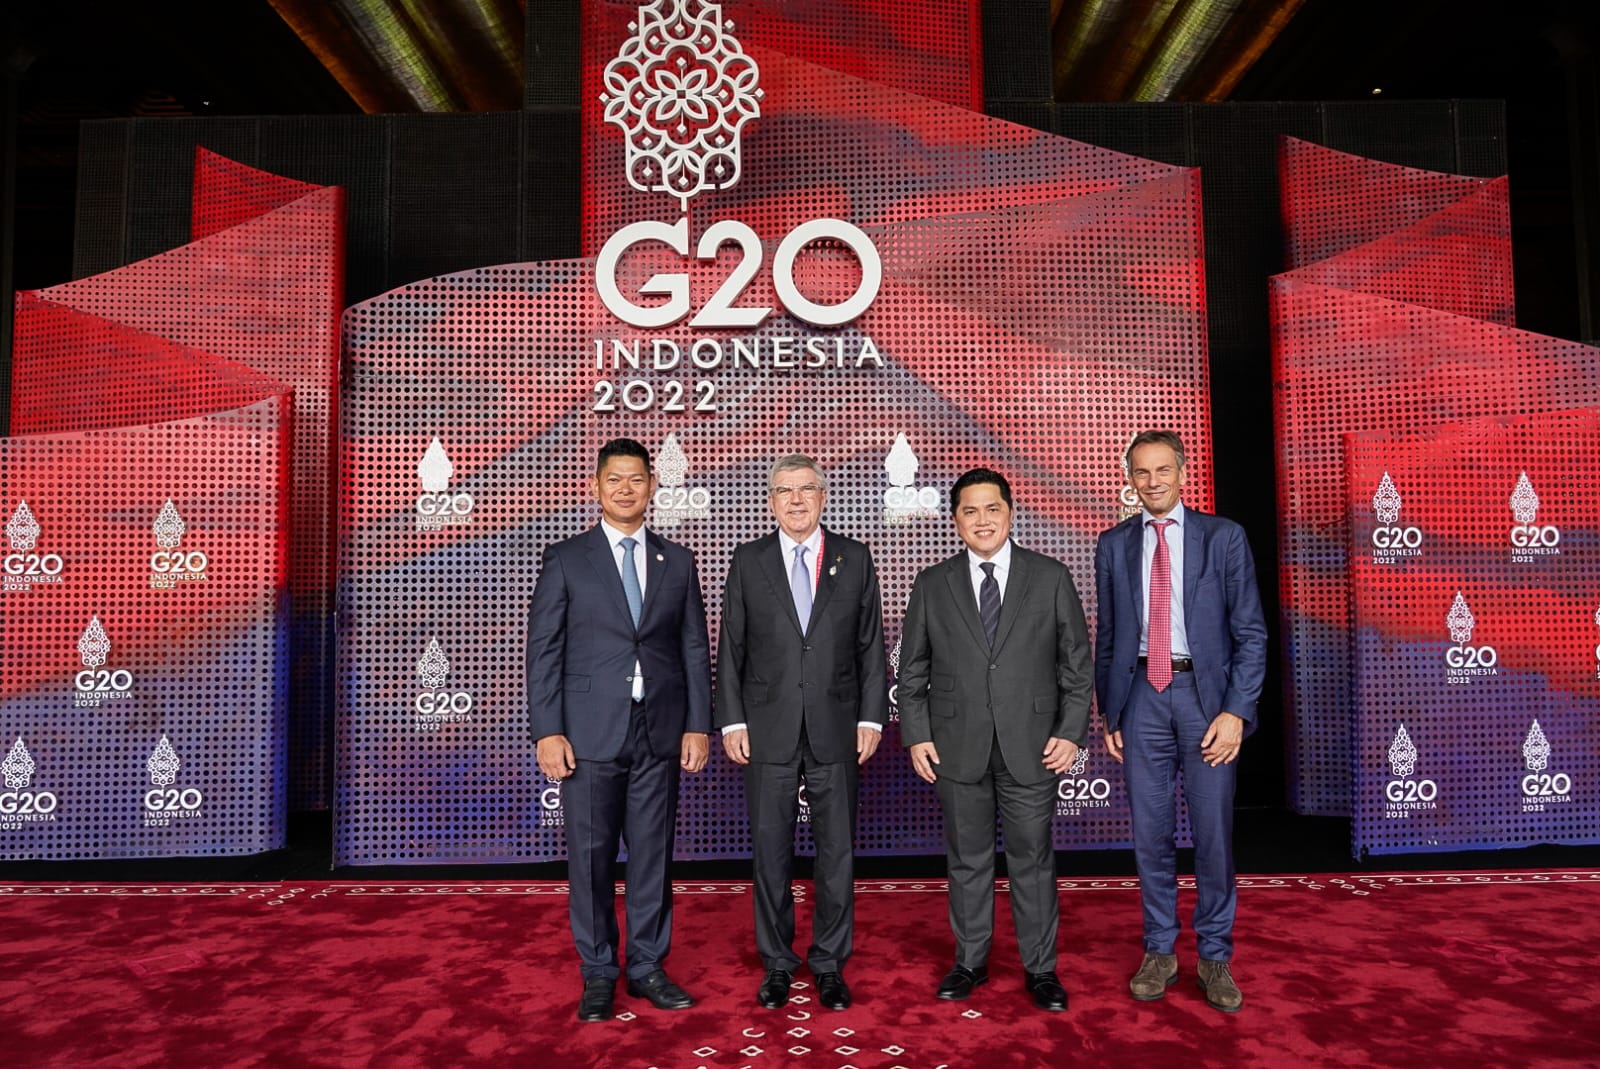 Indonesia Olympic Commitee - Indonesia proposes Nusantara Capital City for 2036 Olympics and Paralympics Bidding